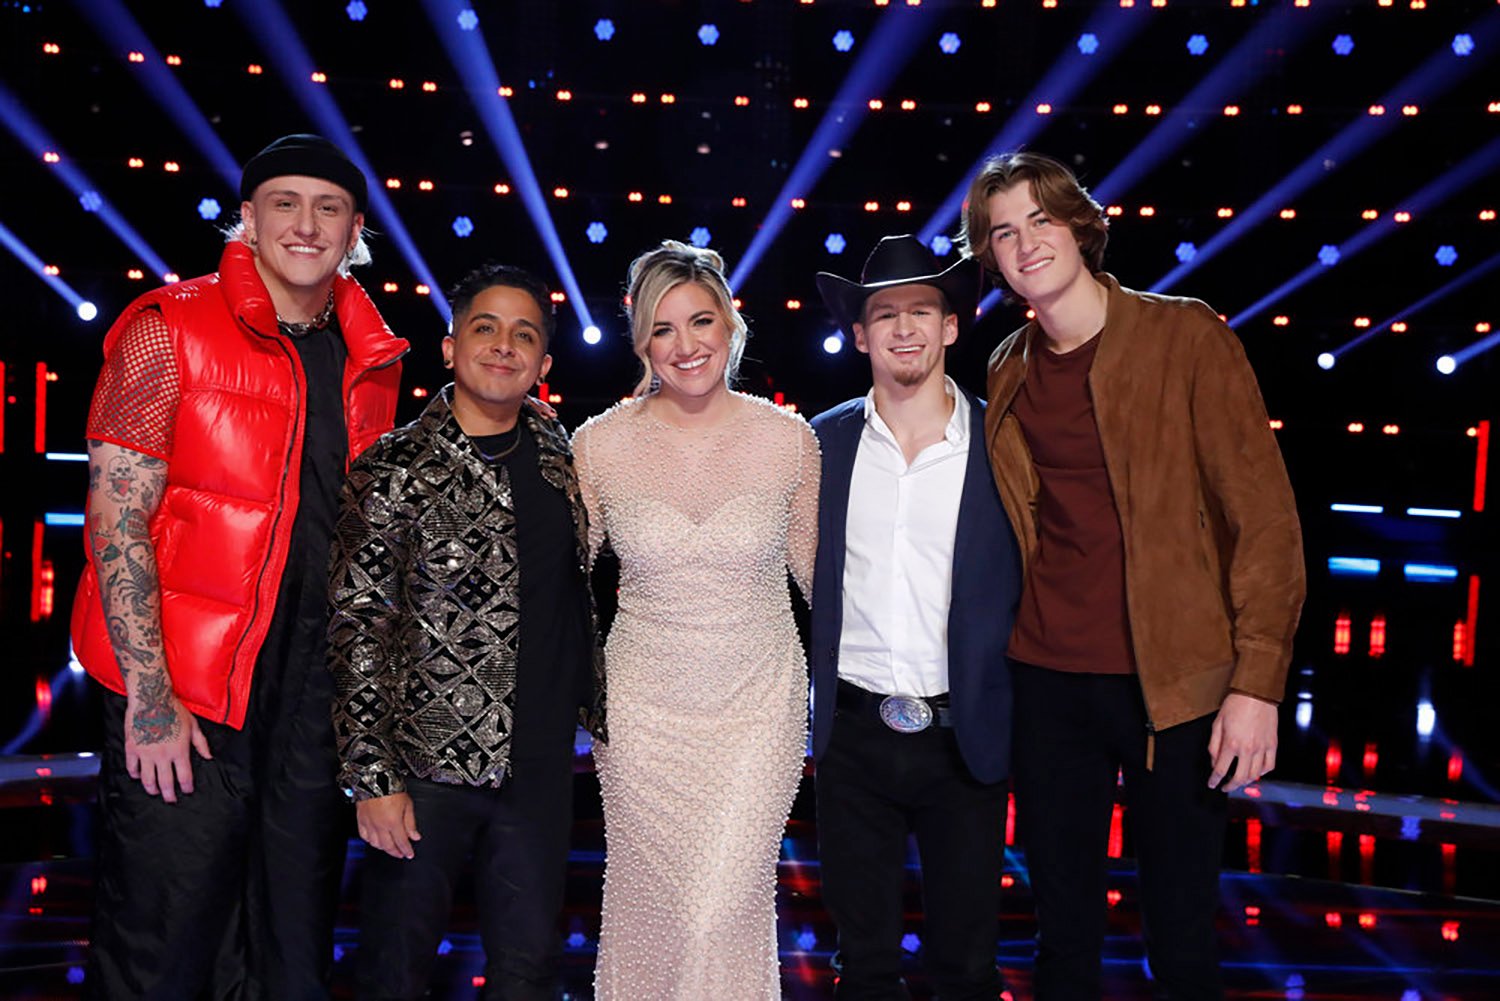 The Voice Season 22 winner predictions: The Top 5 artists Bodie, Omar Jose Cardona, Morgan Myles, Bryce Leatherwood, and Brayden Lape huddle together and smile.